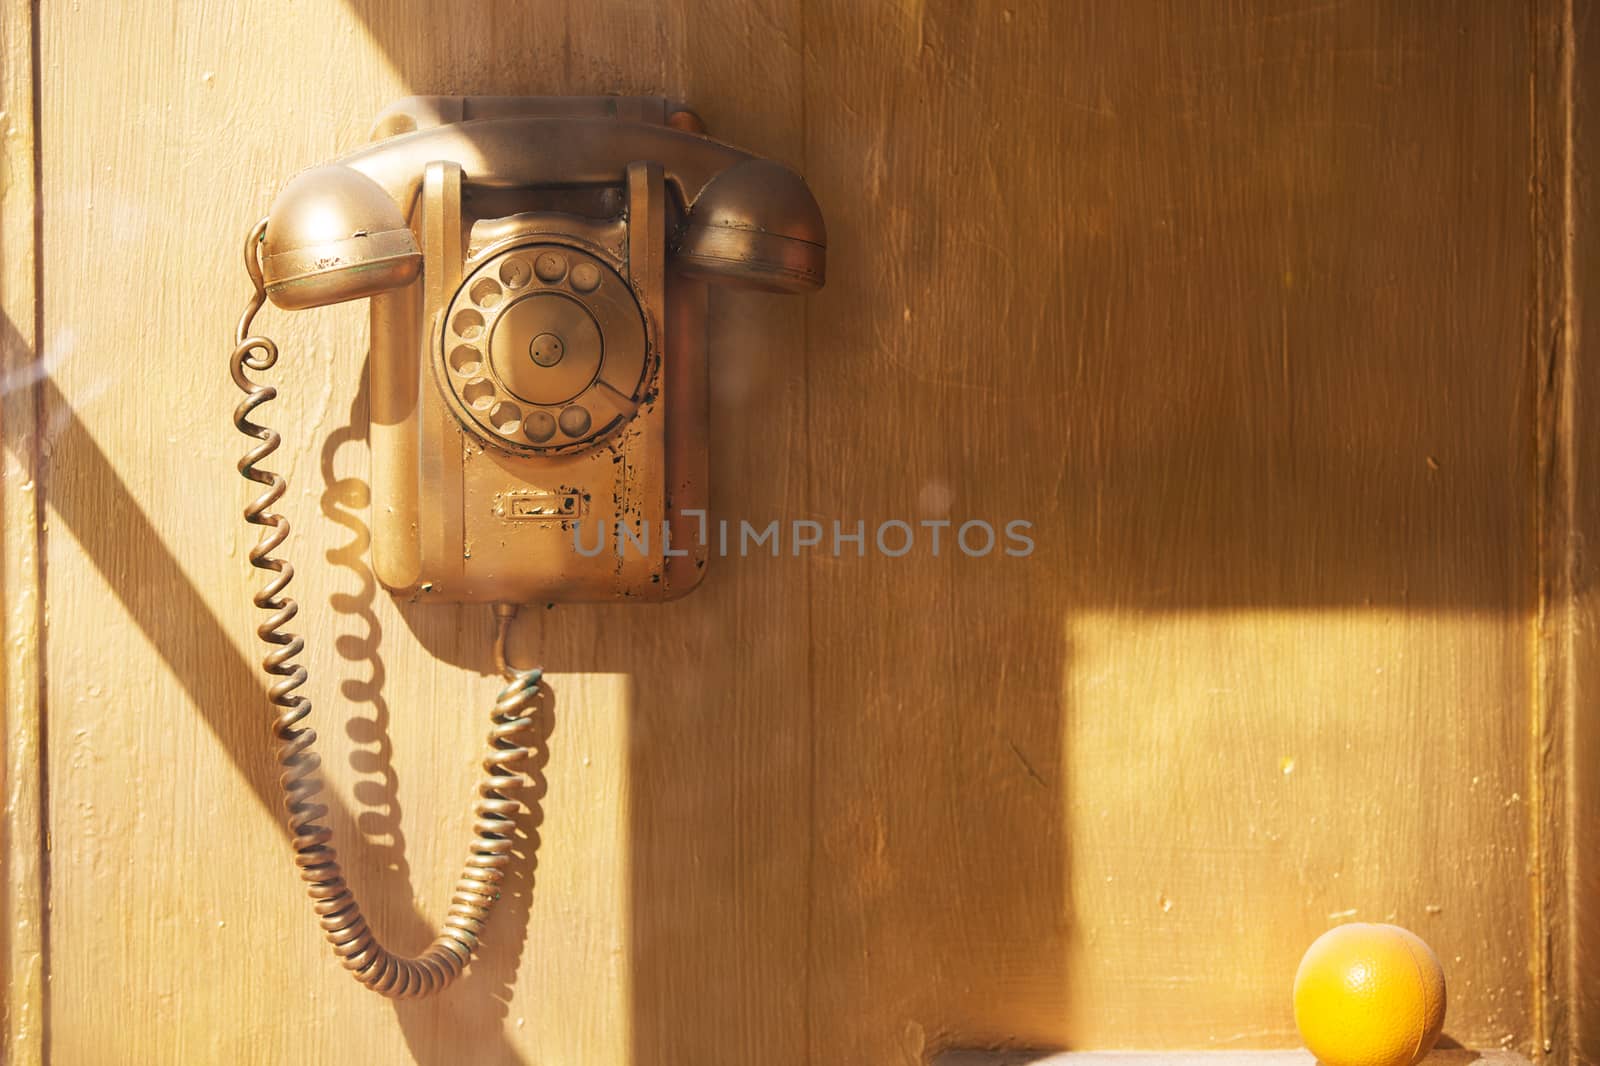 Retro phone in the booth. Telephone in the phone booth